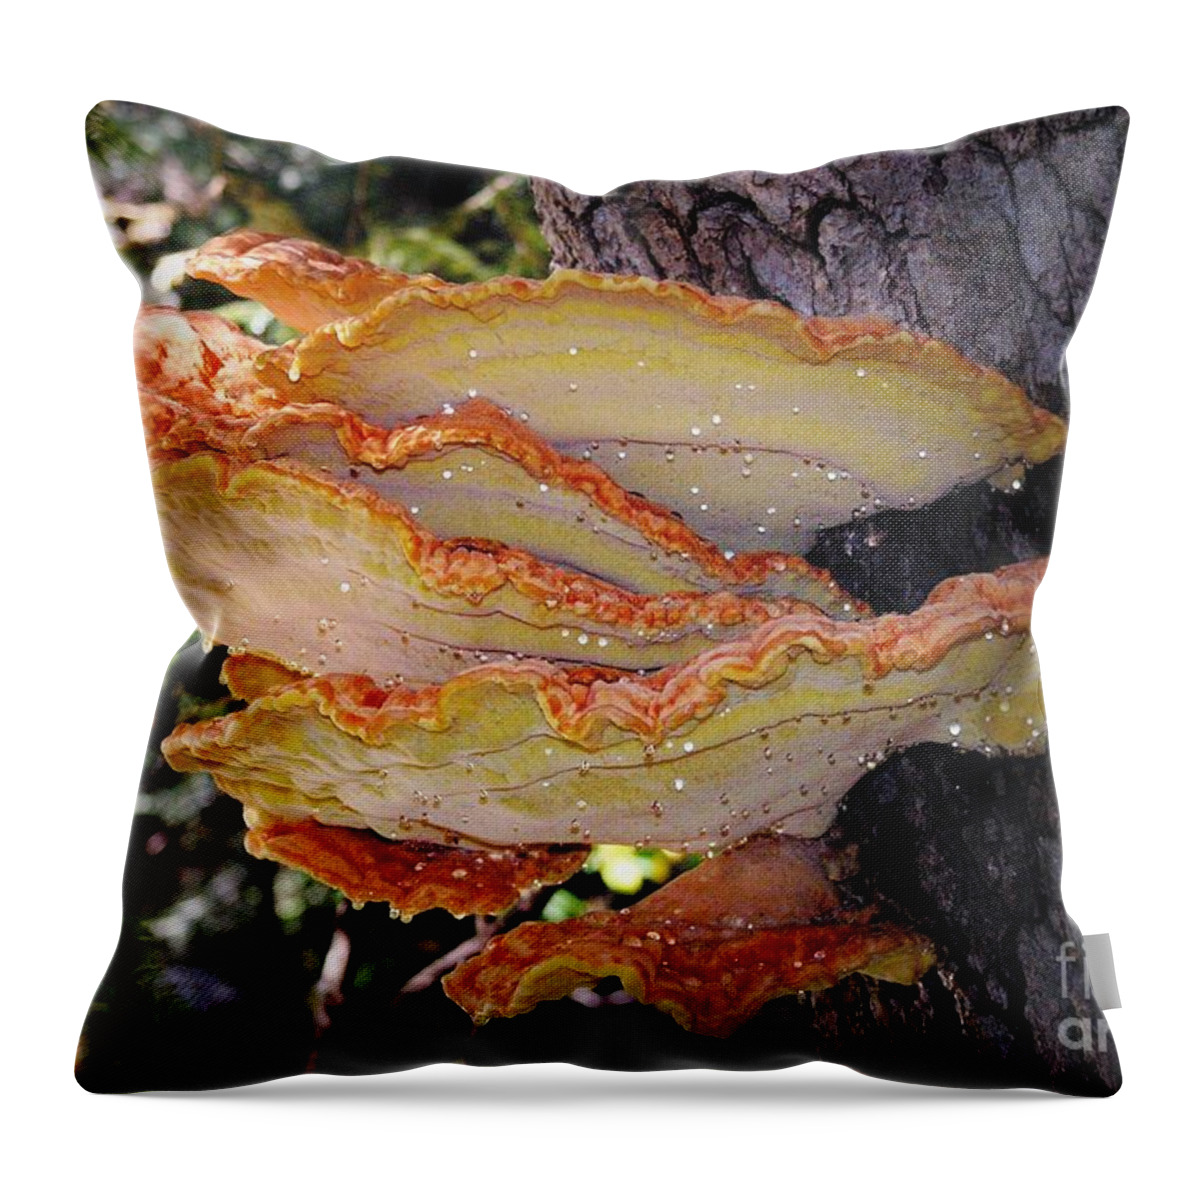 Fungus Throw Pillow featuring the photograph Woodland Art by Kimberly Furey